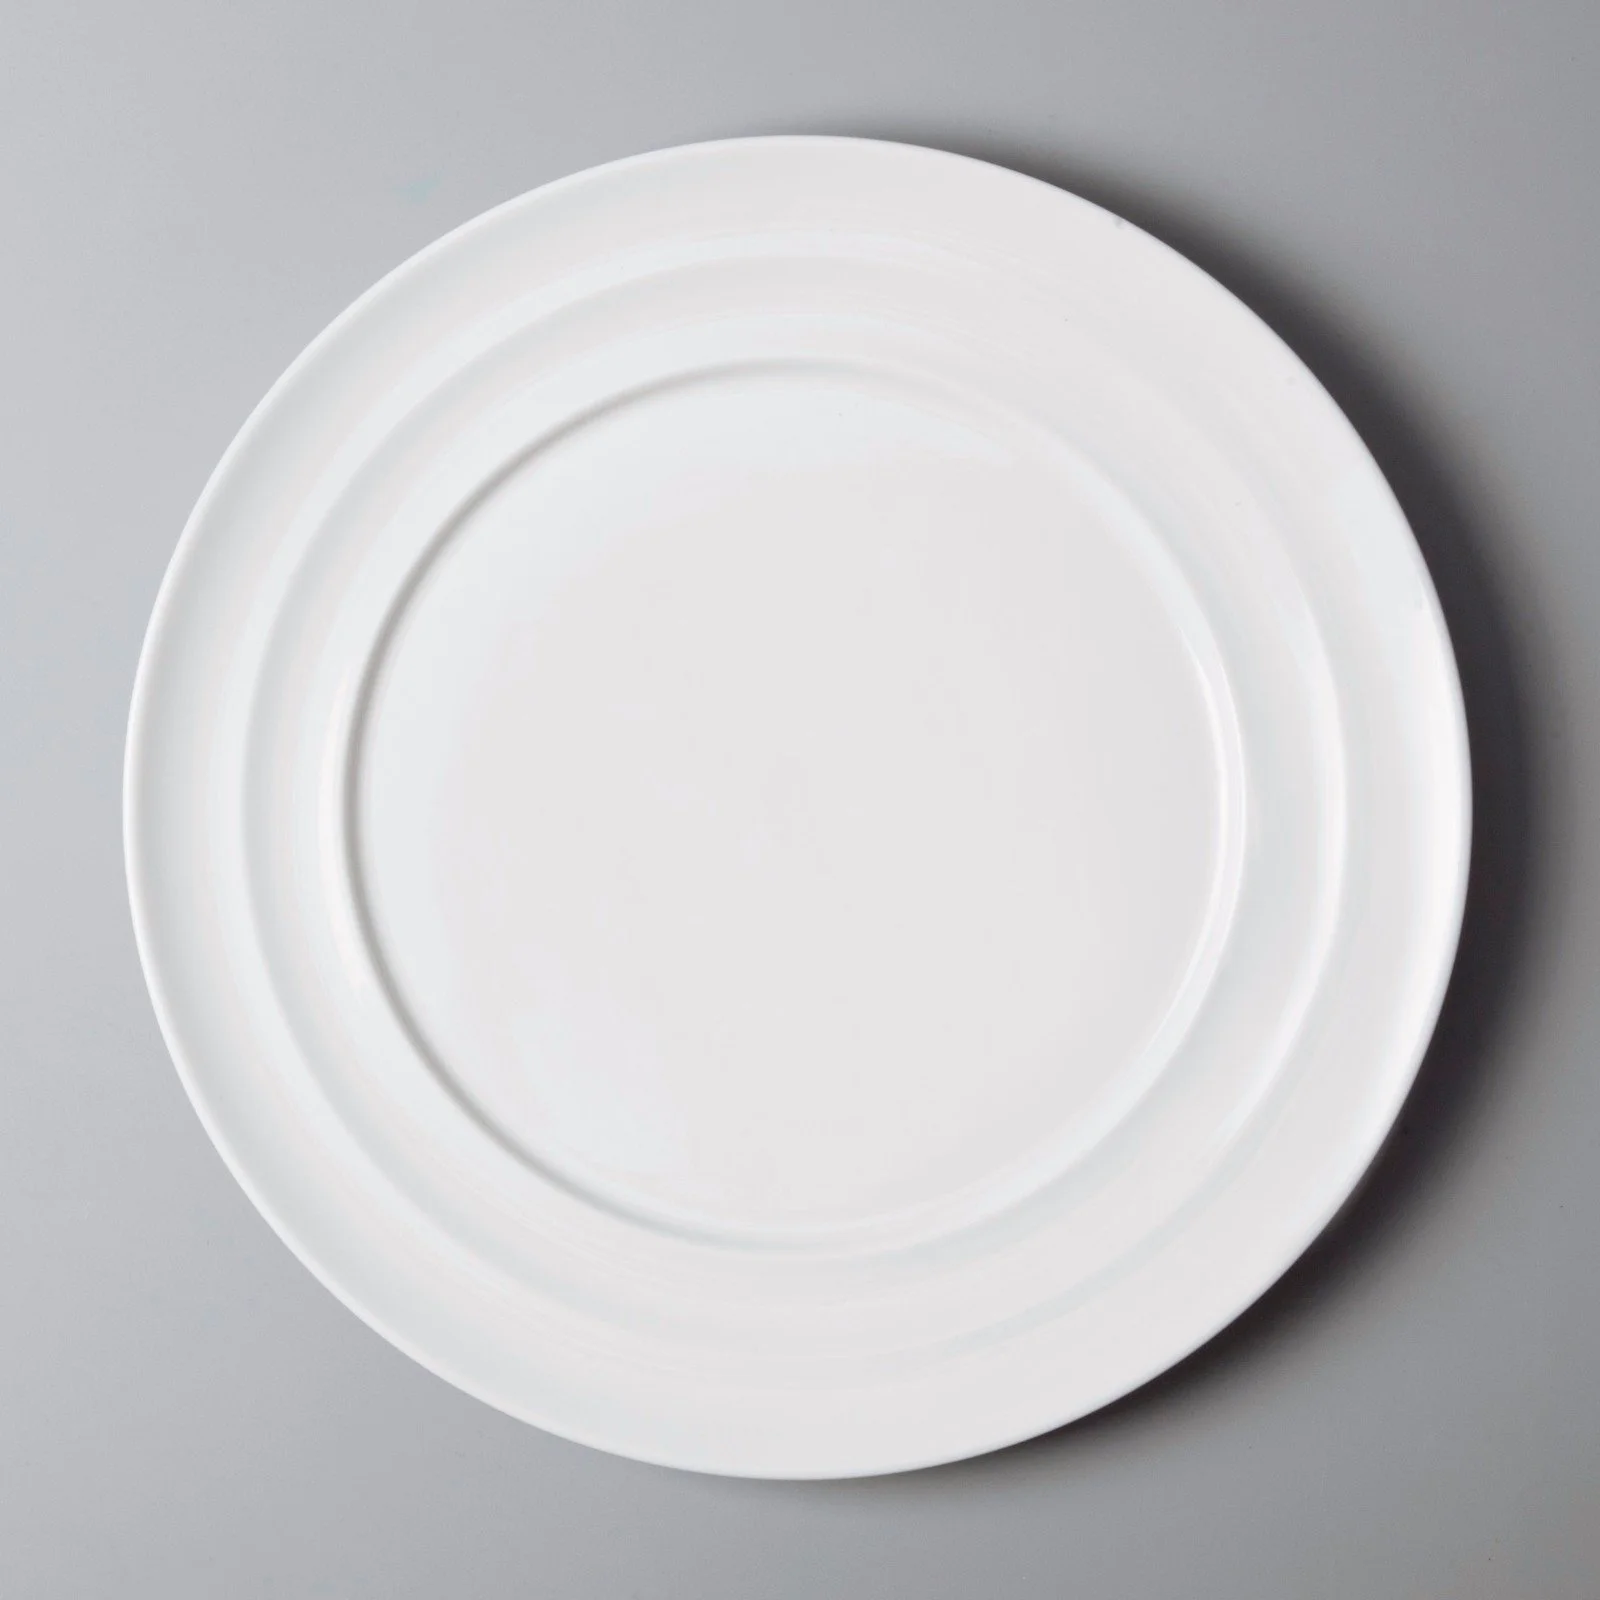 glaze commercial restaurant plates German style directly sale for bistro